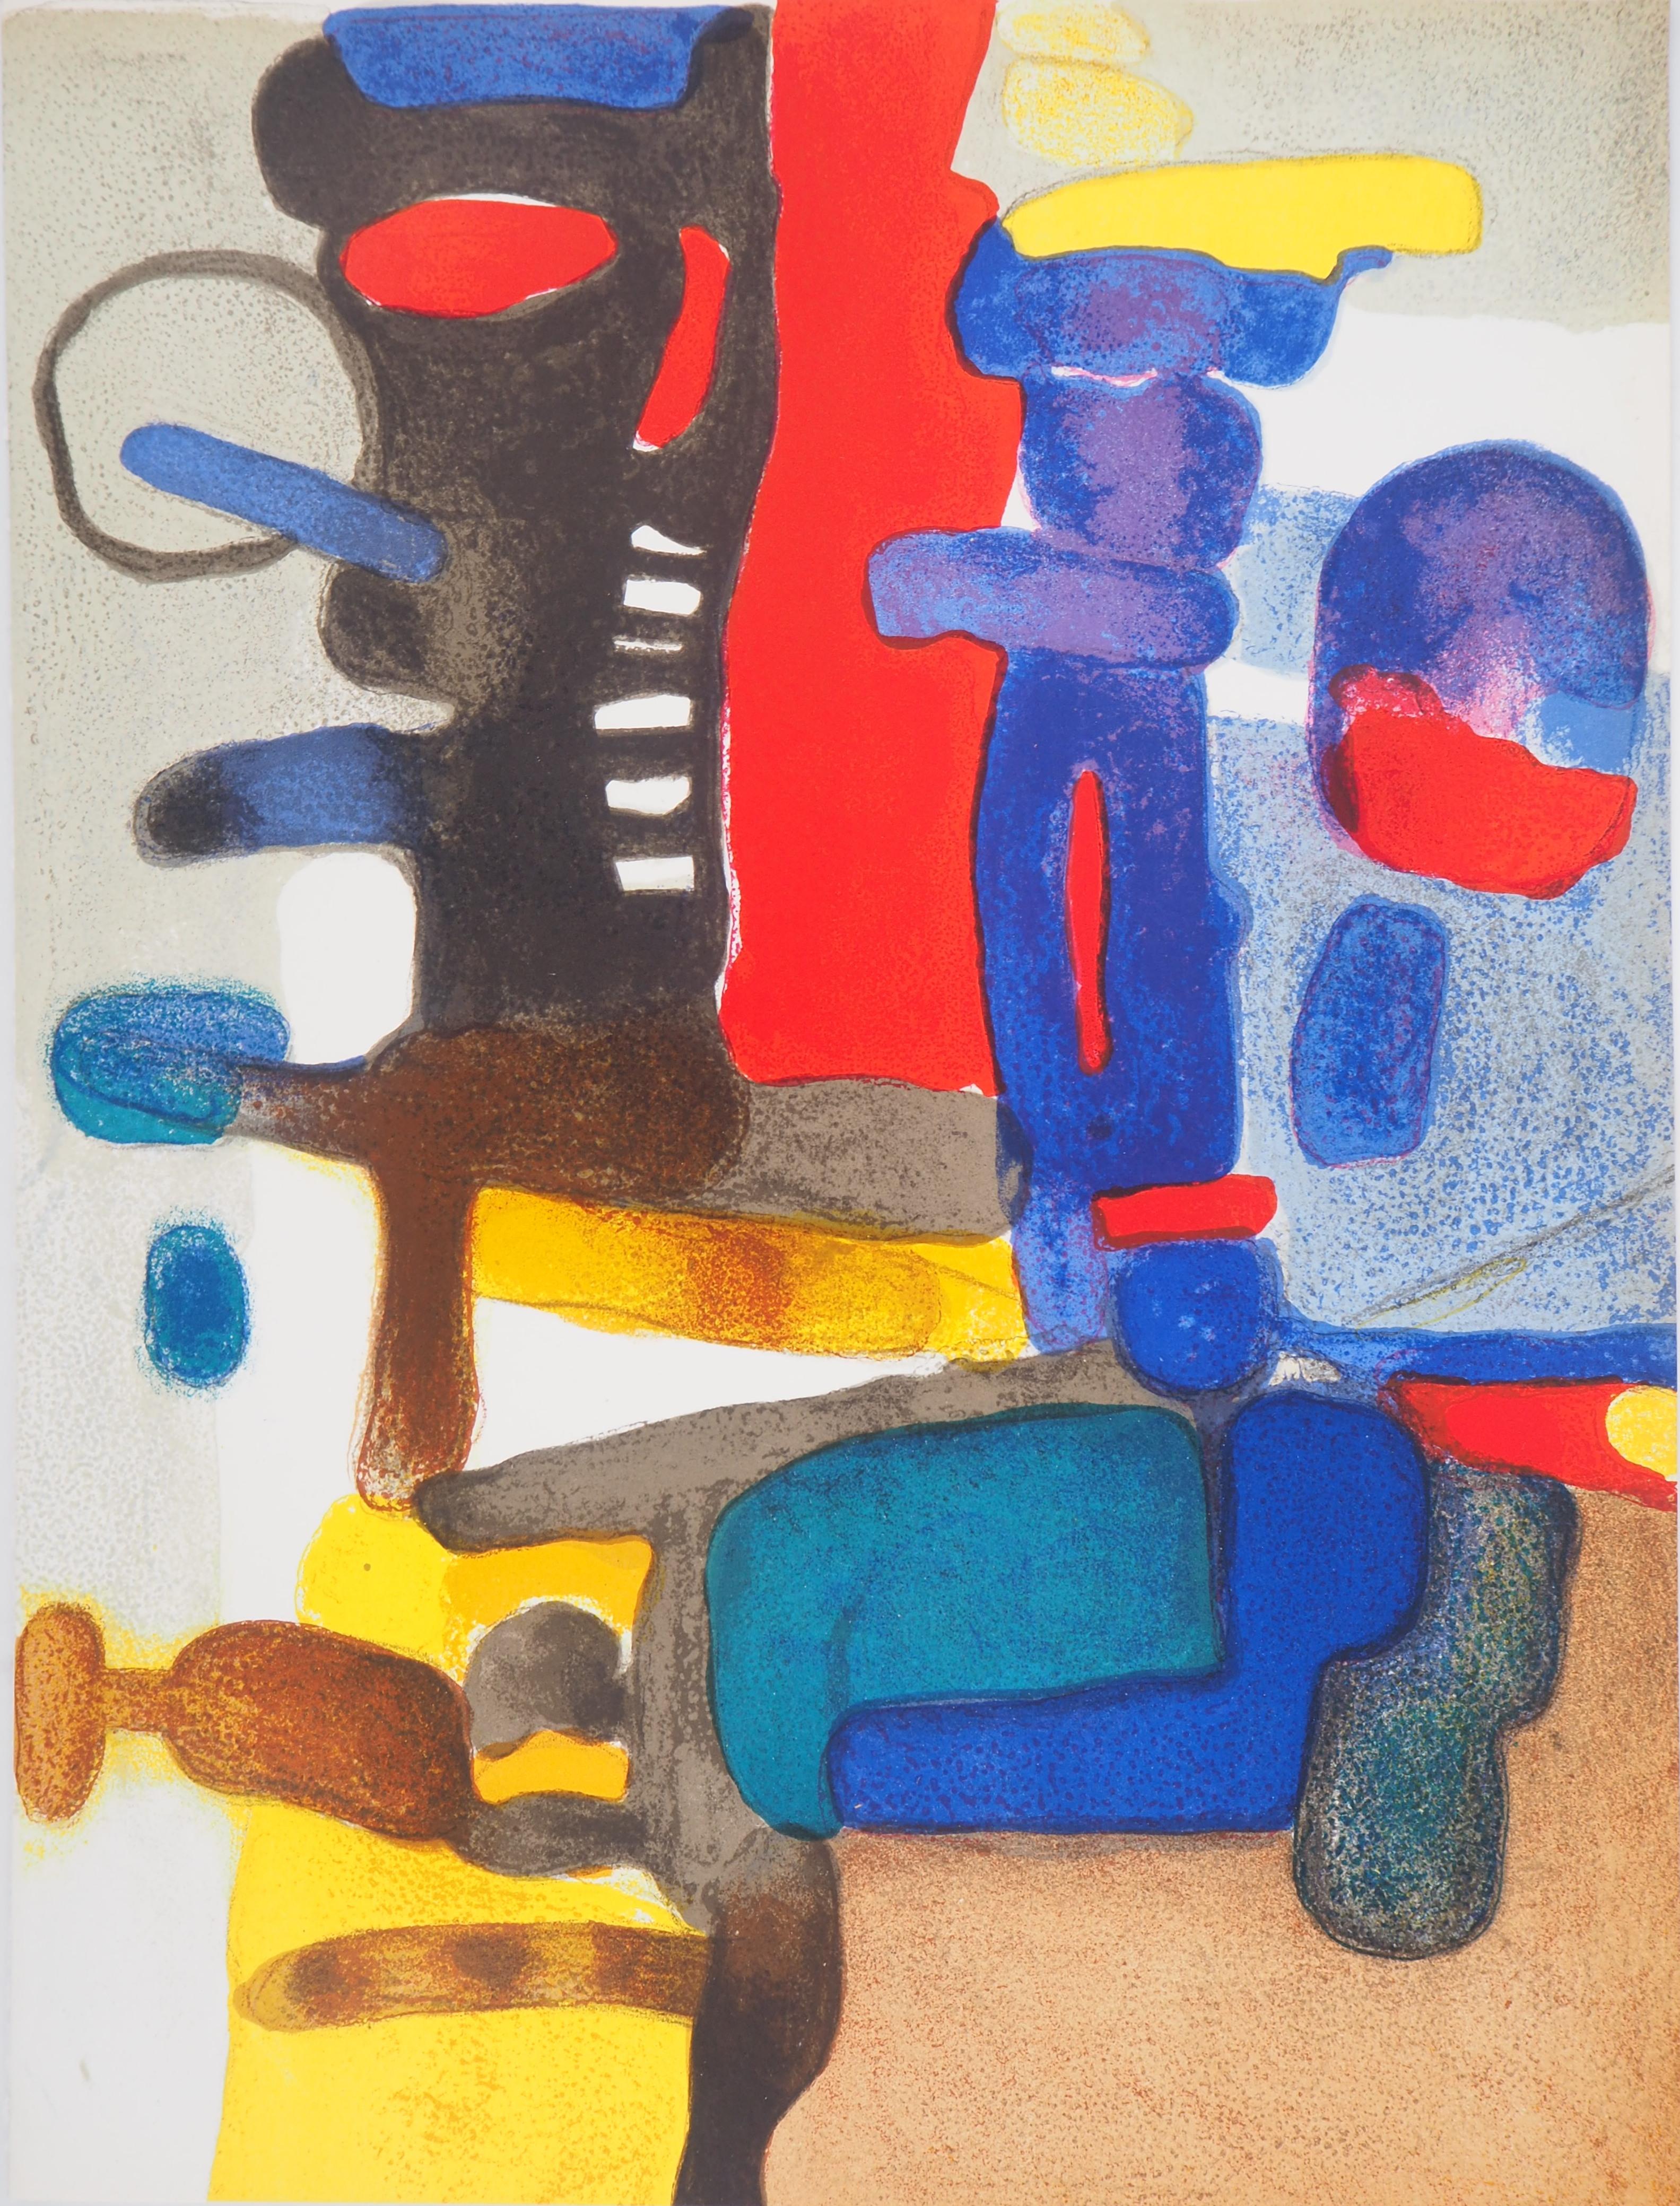 Guidour (Abstract Landscape in Blue and Red) - Original lithograph